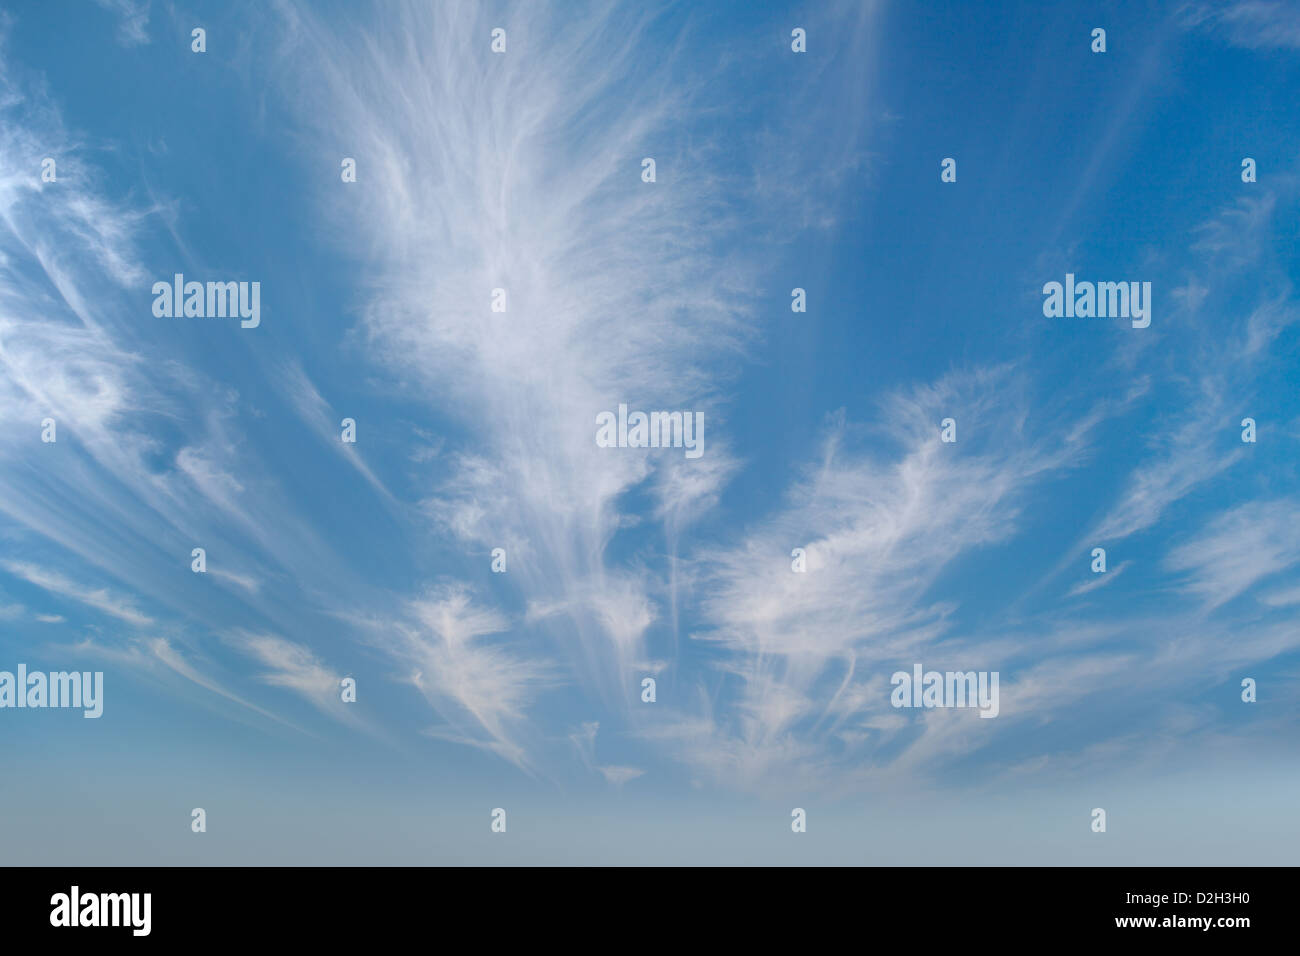 Beautiful sky with cirrus clouds photographed by a wide angle Stock Photo